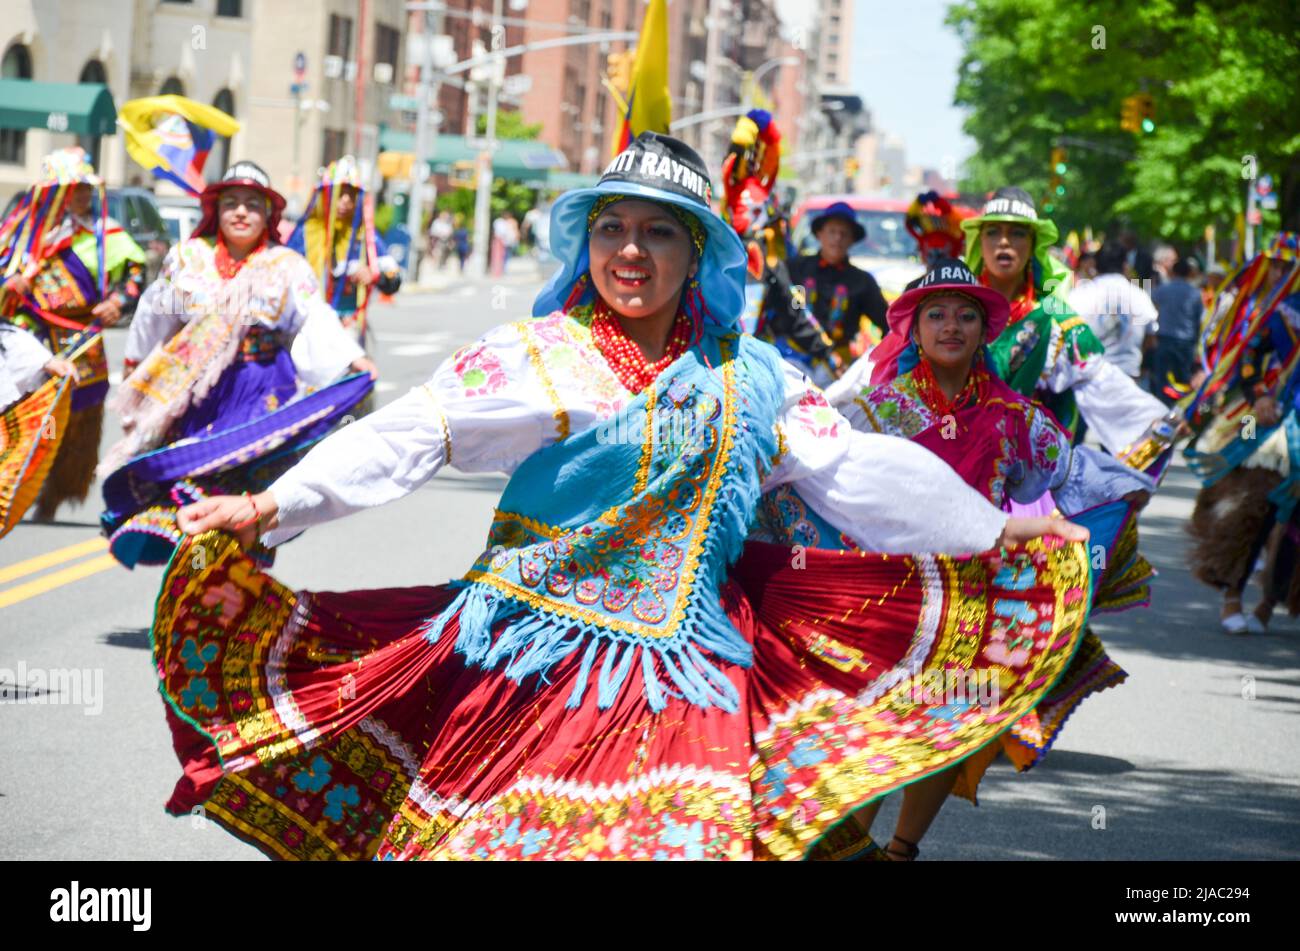 Girls are seen dancing with traditional Ecuadorian outfits during the